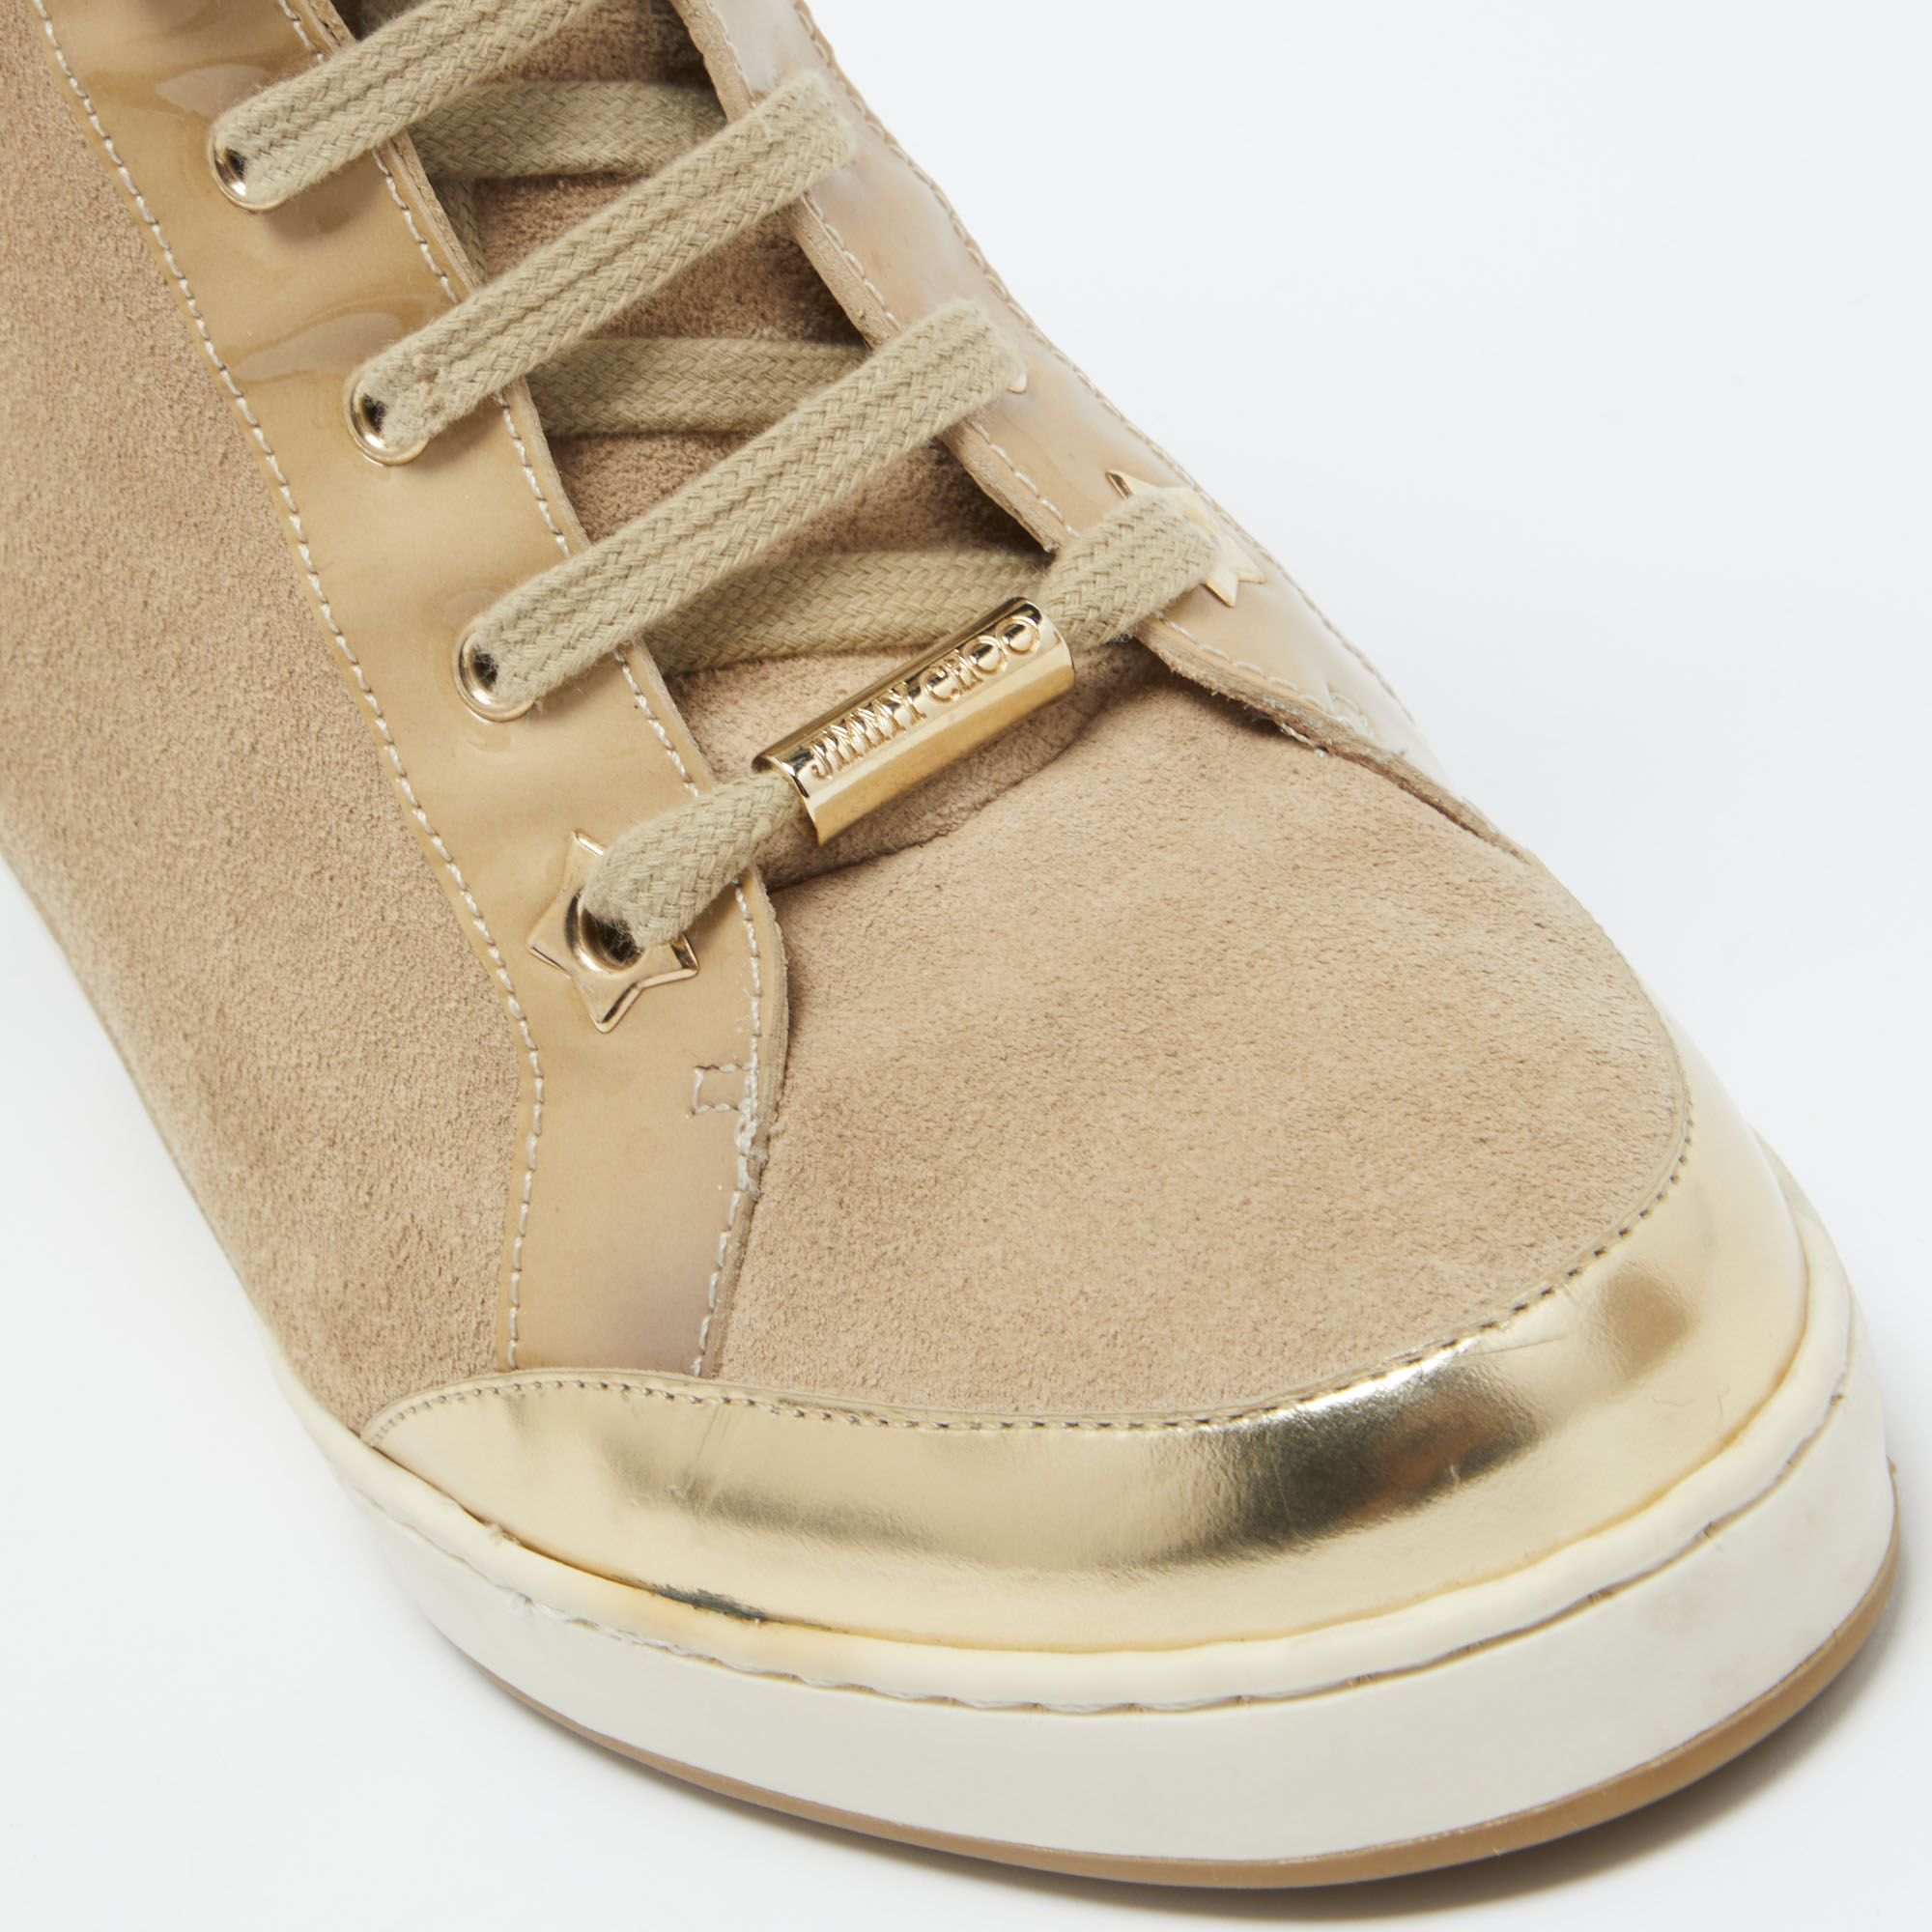 Jimmy Choo Beige Suede And Leather Panama Wedge Sneakers Size 39